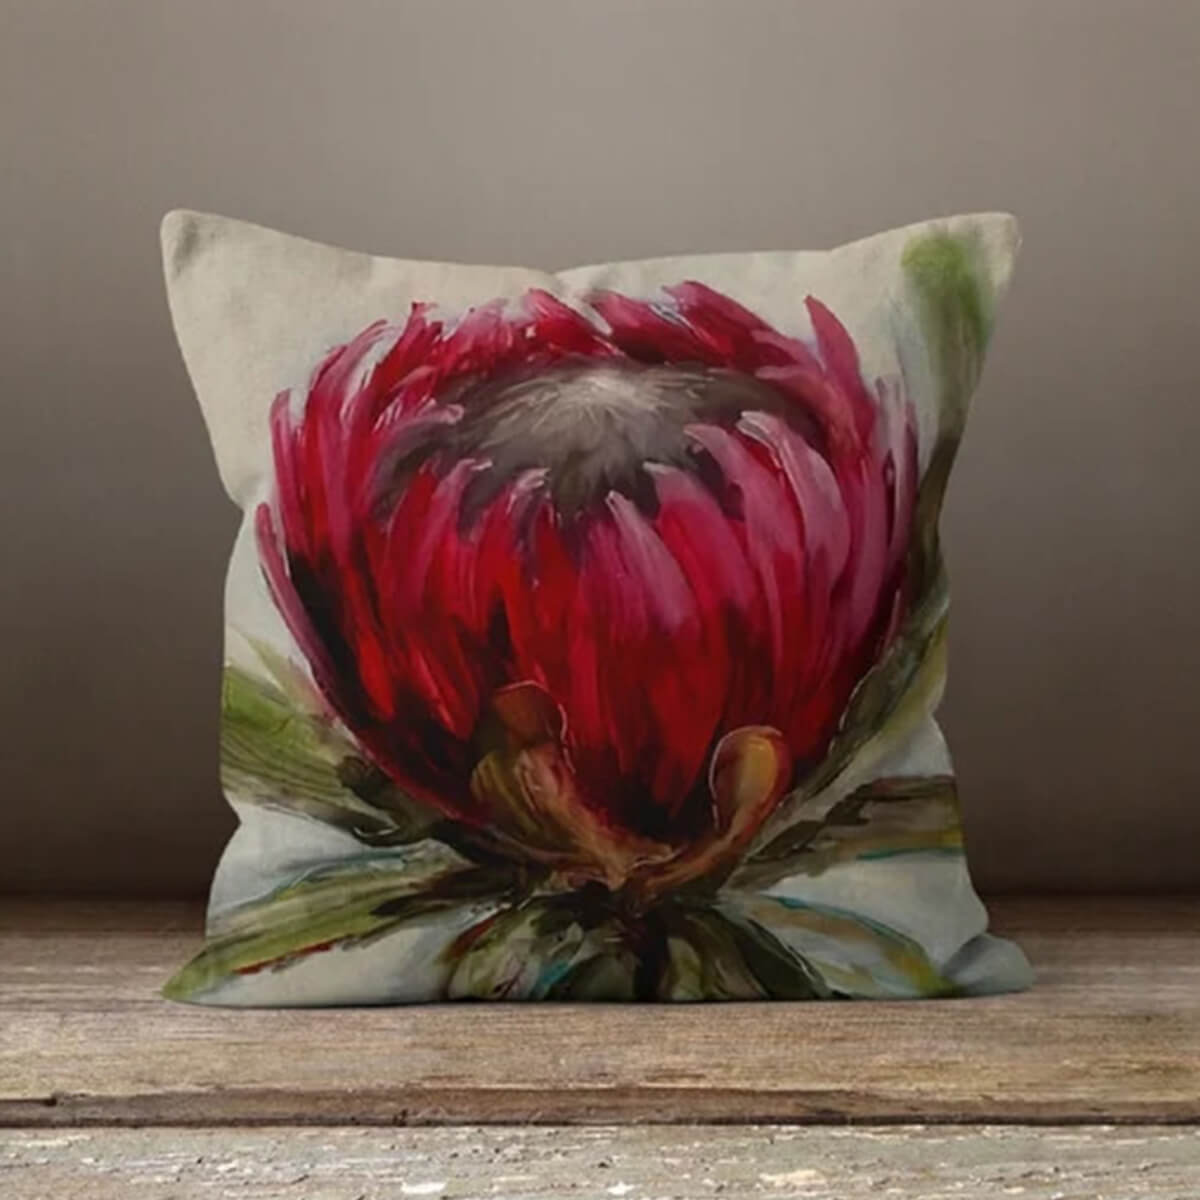 Diversity Floral Cushion Covers